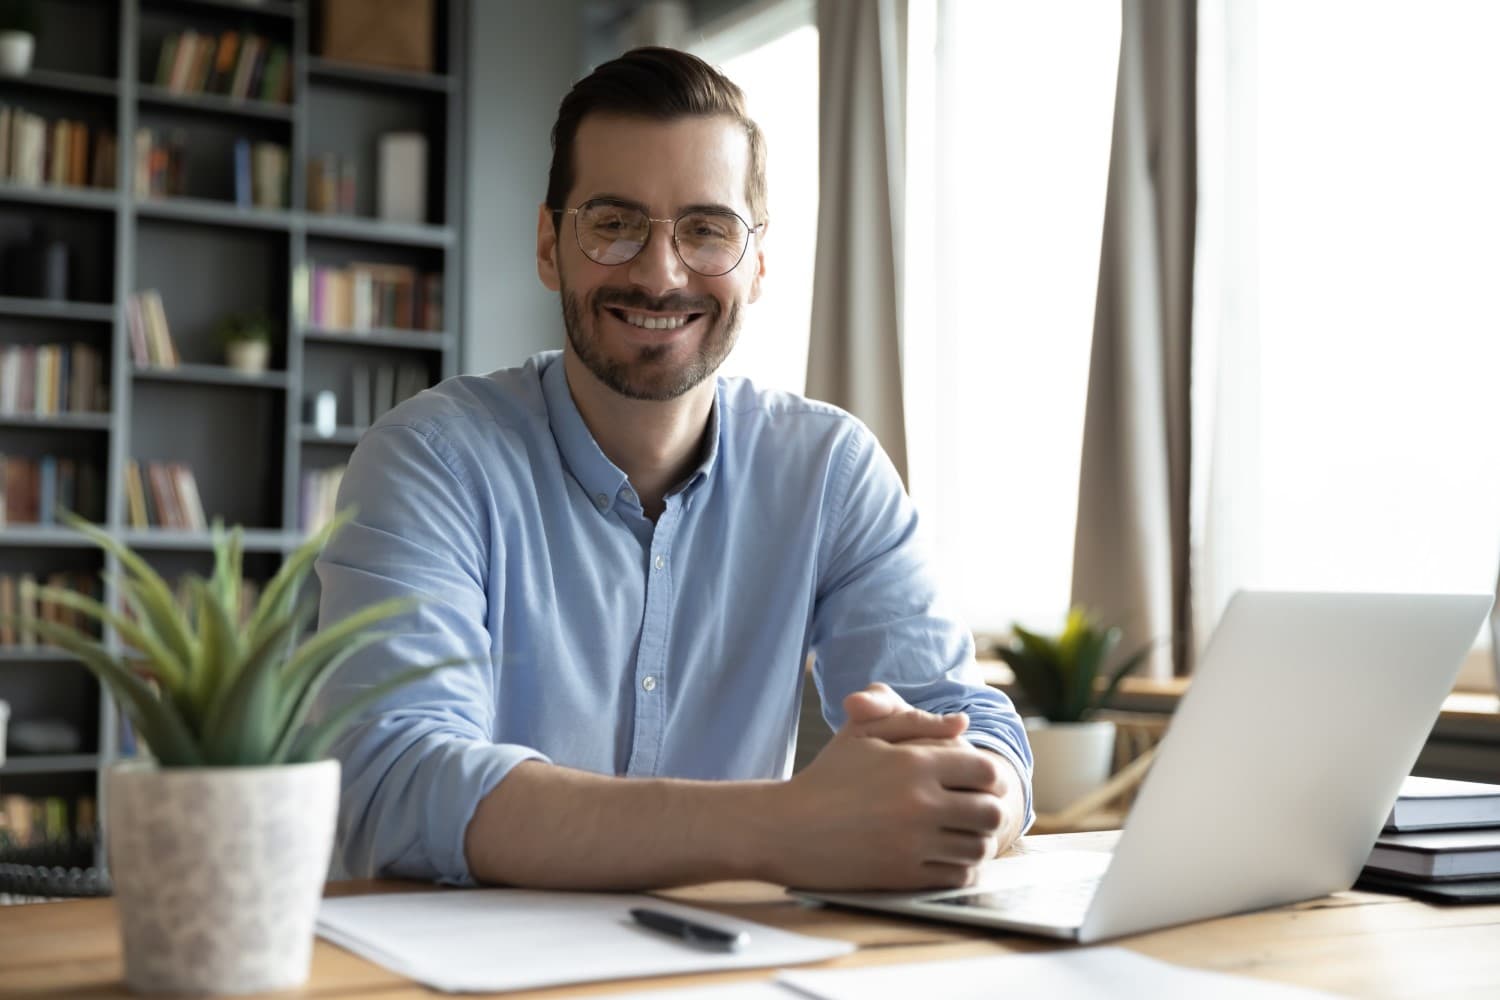 Smiling man with beard in front of laptop